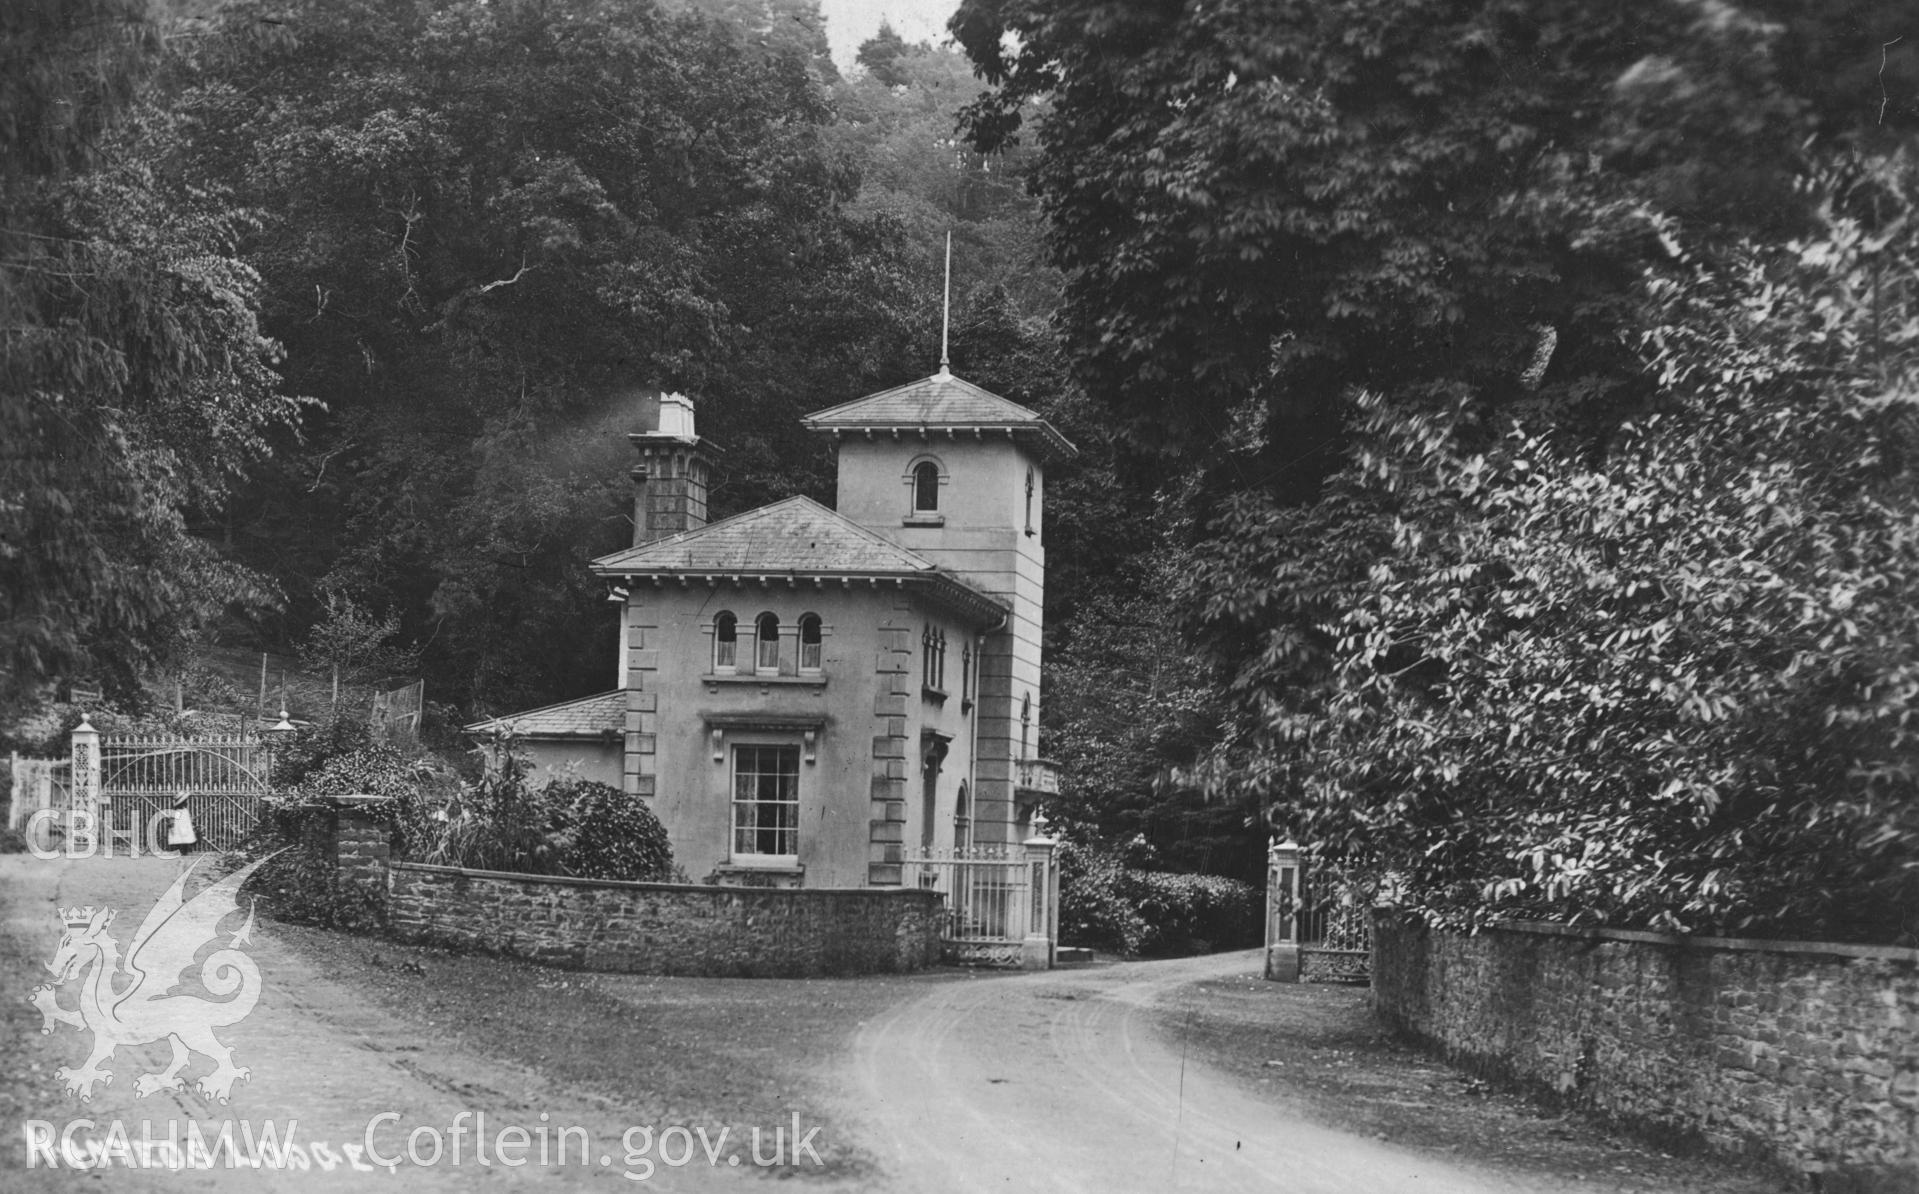 Digital copy of postcard showing Nanteos Lodge, early 20th century.  Loaned for copying by Charlie Downes.